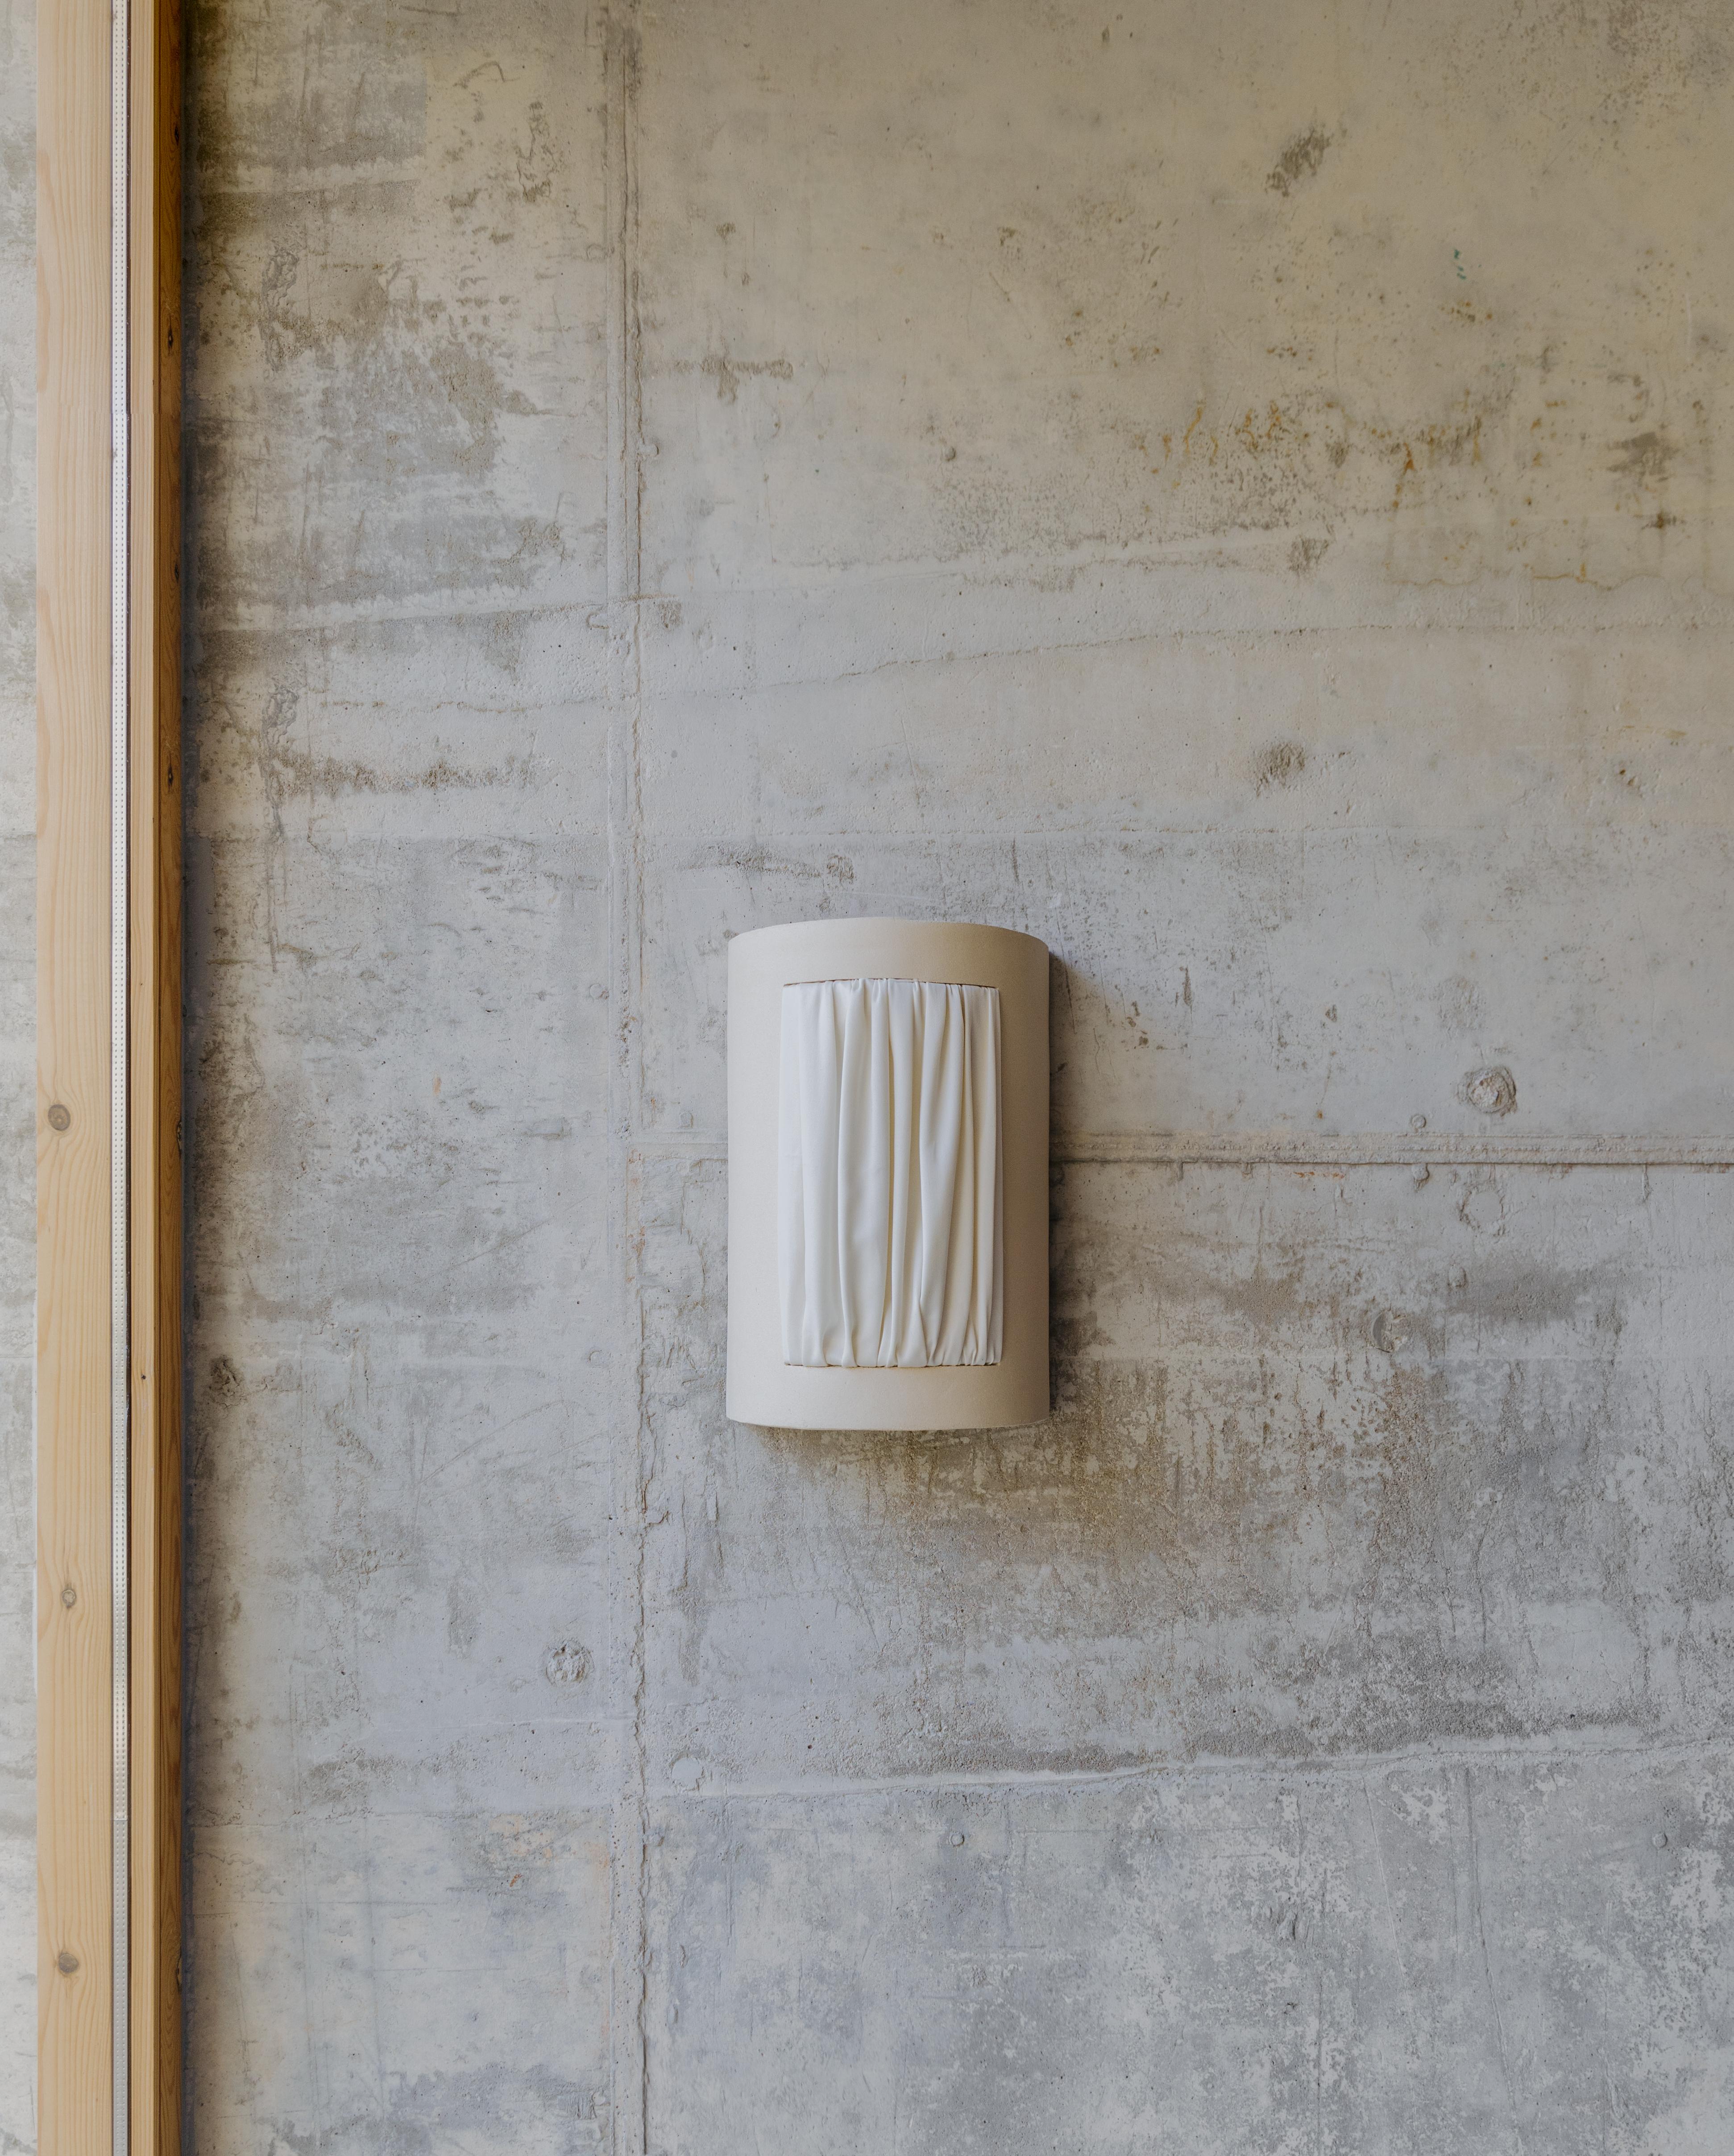 Almond Medium Istos Wall Light by Lisa Allegra
Dimensions: D 13x W 23 x H 34 cm.
Materials: Piece in ceramic and Dedar fireproofed fabric color Ivory.

Also available in different colored fabric: ivory, nude, salvia, senape or beige. Please contact